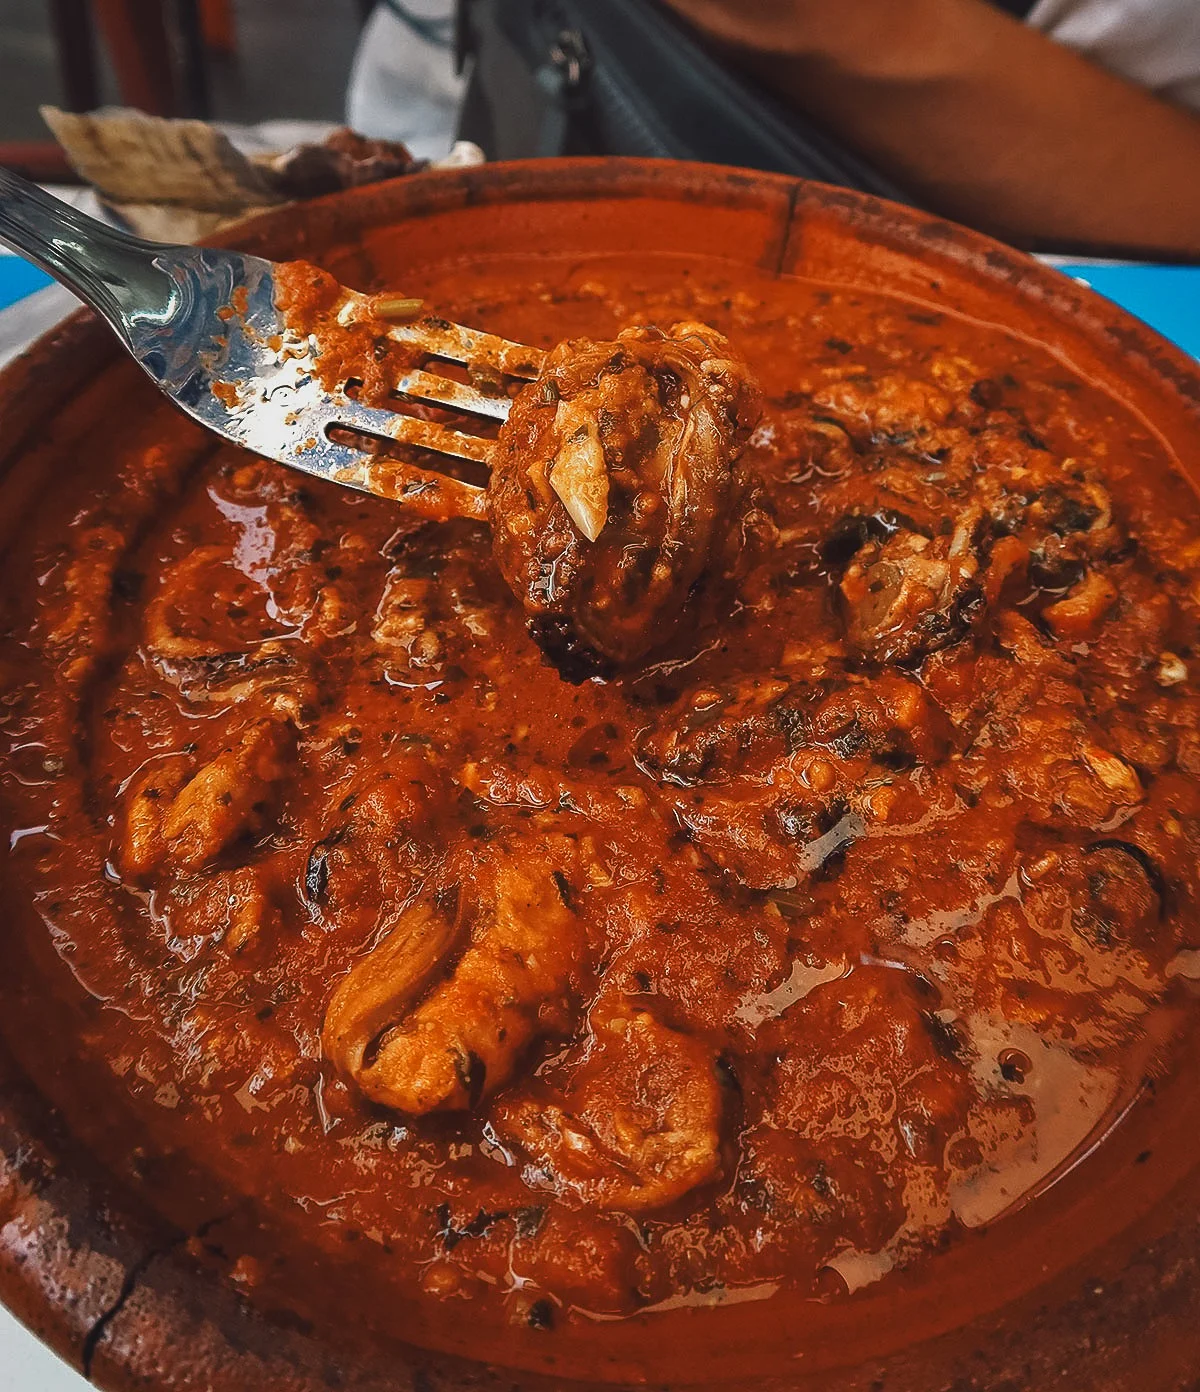 Mussels tagine at a restaurant in Casablanca